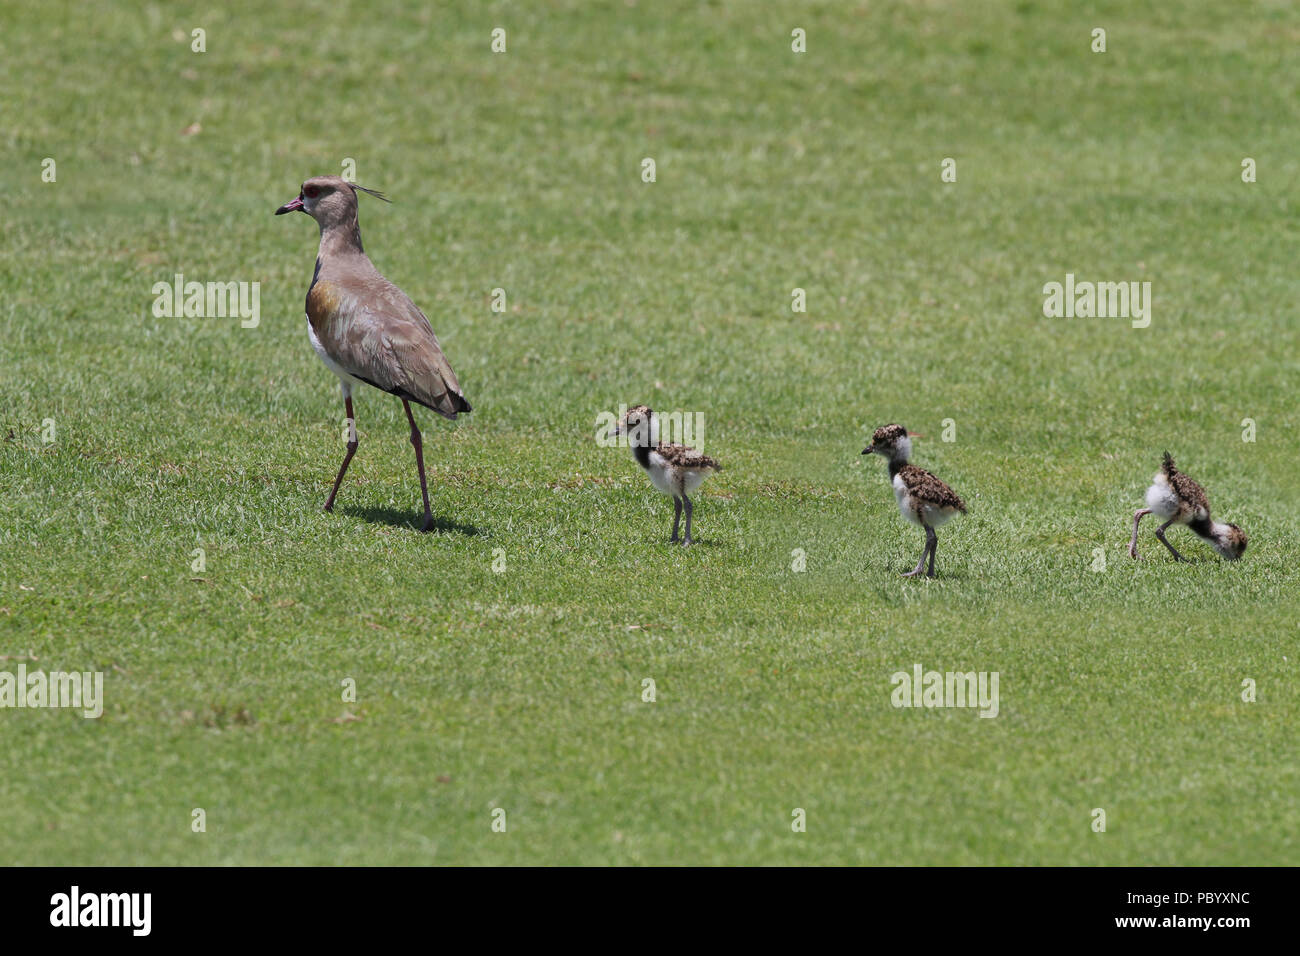 Southern Lapwing mother with three little chicks walking on grass looking for food Stock Photo